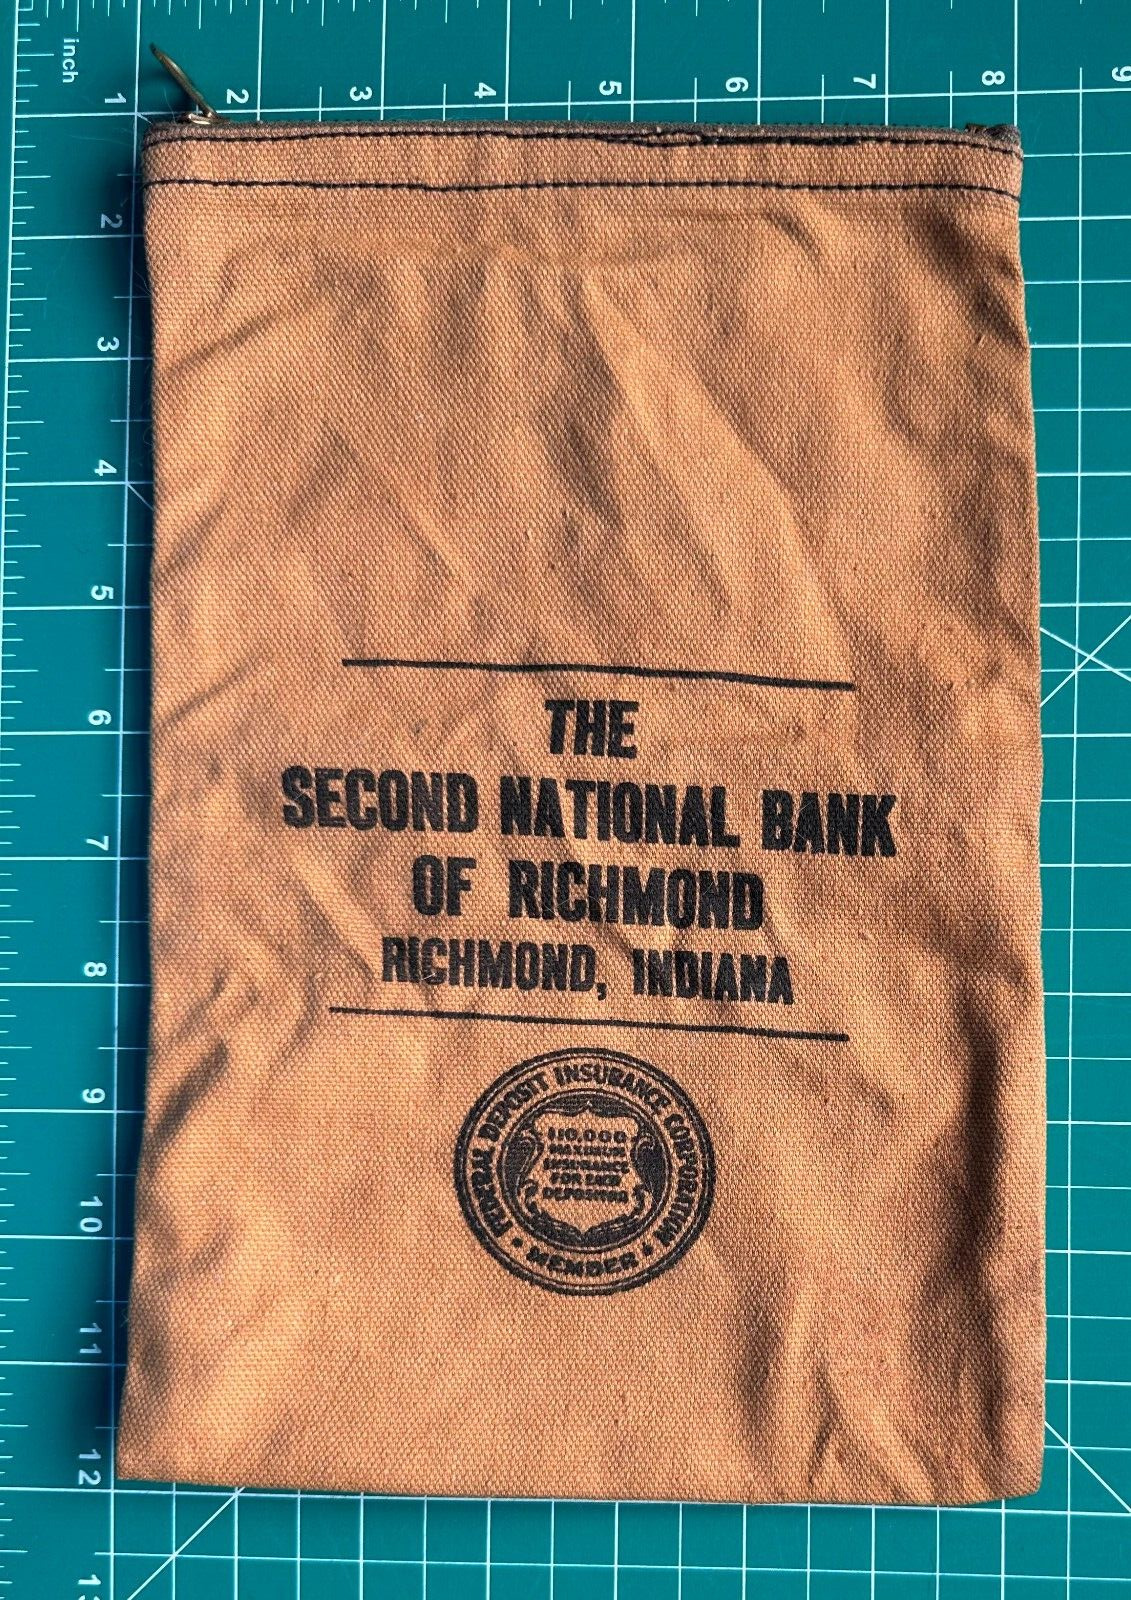 Richmond Indiana Second National Bank Deposit Bag Material USED